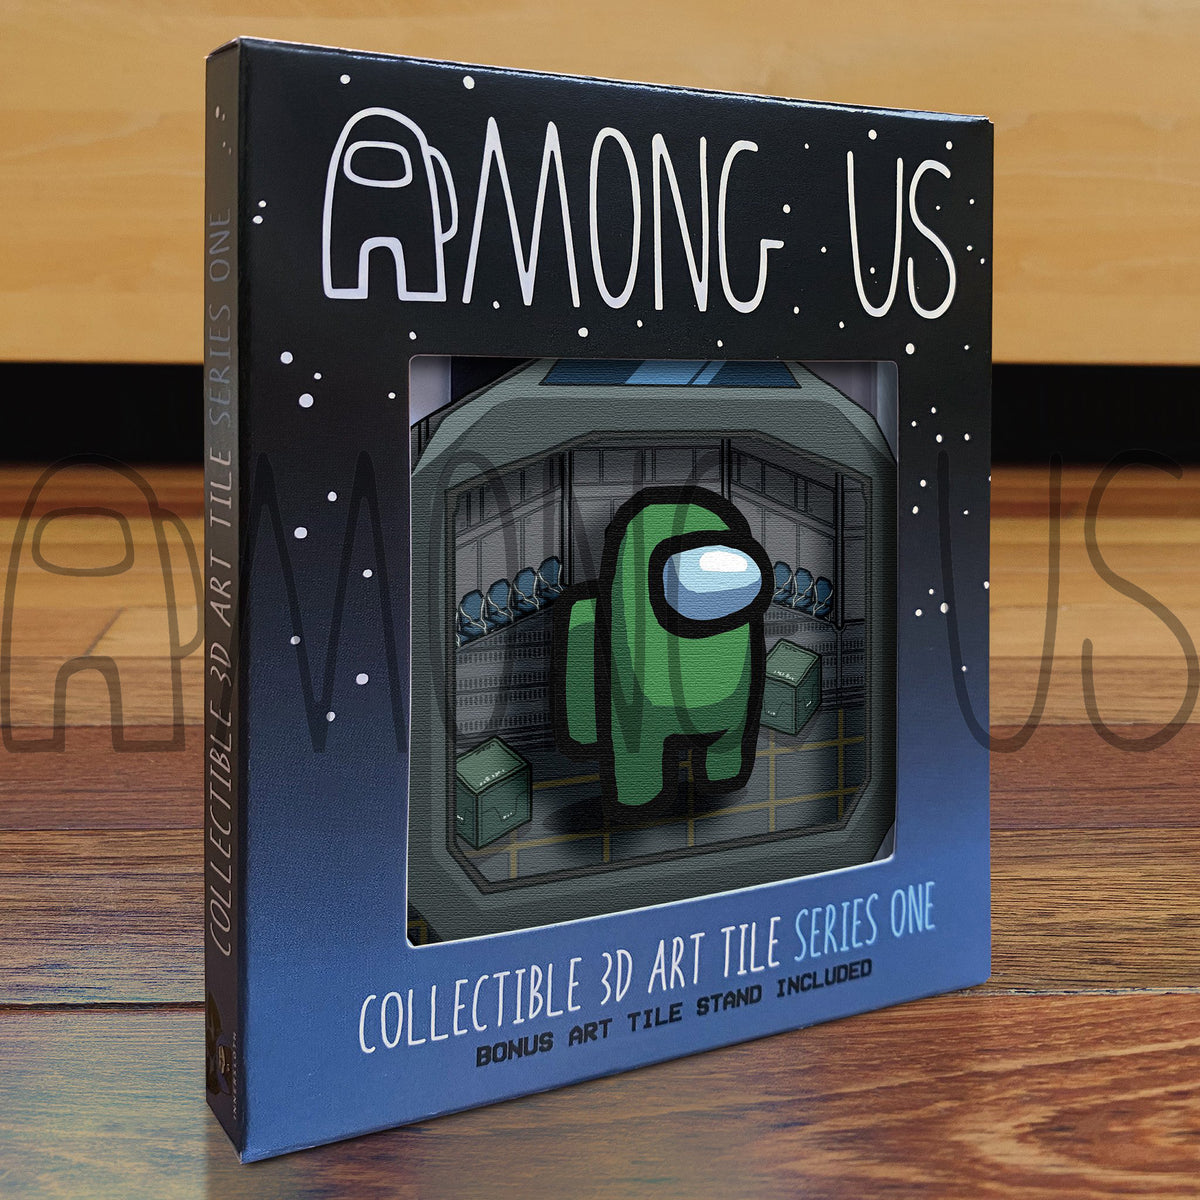 A photograph of the boxed Among Us: Crewmate Art Tiles by Artovision 3D. The art tile shows through the box window and shows a standing green crewmate and art tile stand.